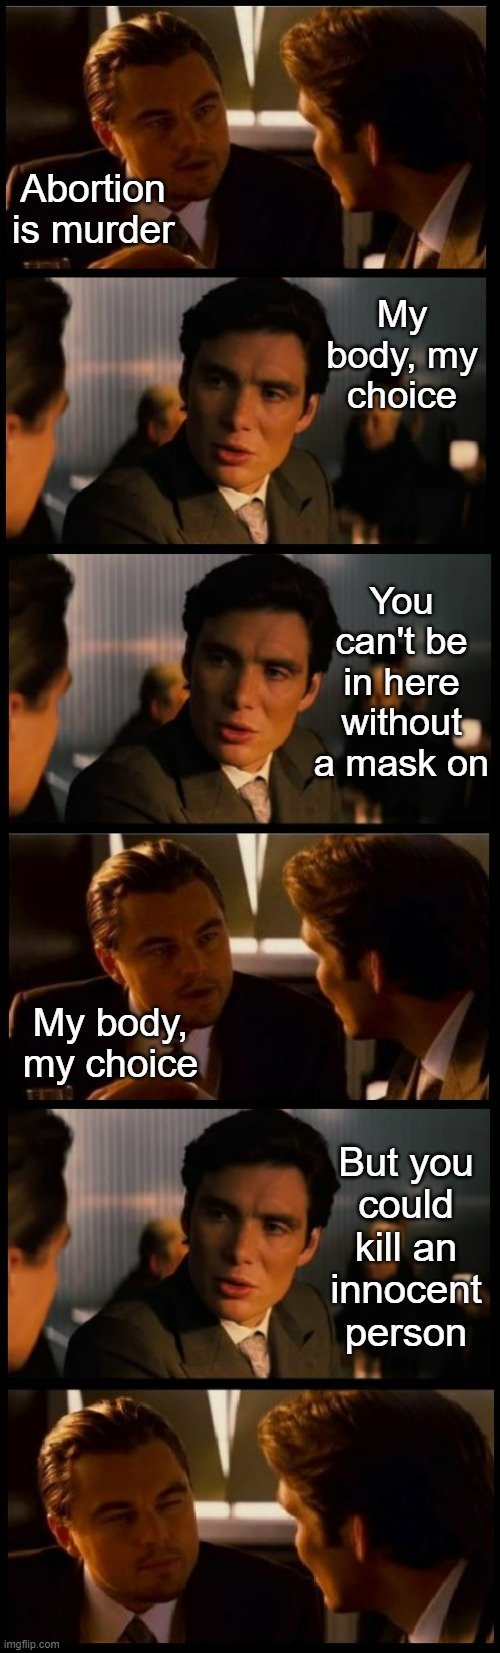 Liberal logic | Abortion is murder; My body, my choice; You can't be in here without a mask on; My body, my choice; But you
could kill an
innocent person | image tagged in liberals,liberal logic,democrats,abortion,masks,covid-19 | made w/ Imgflip meme maker